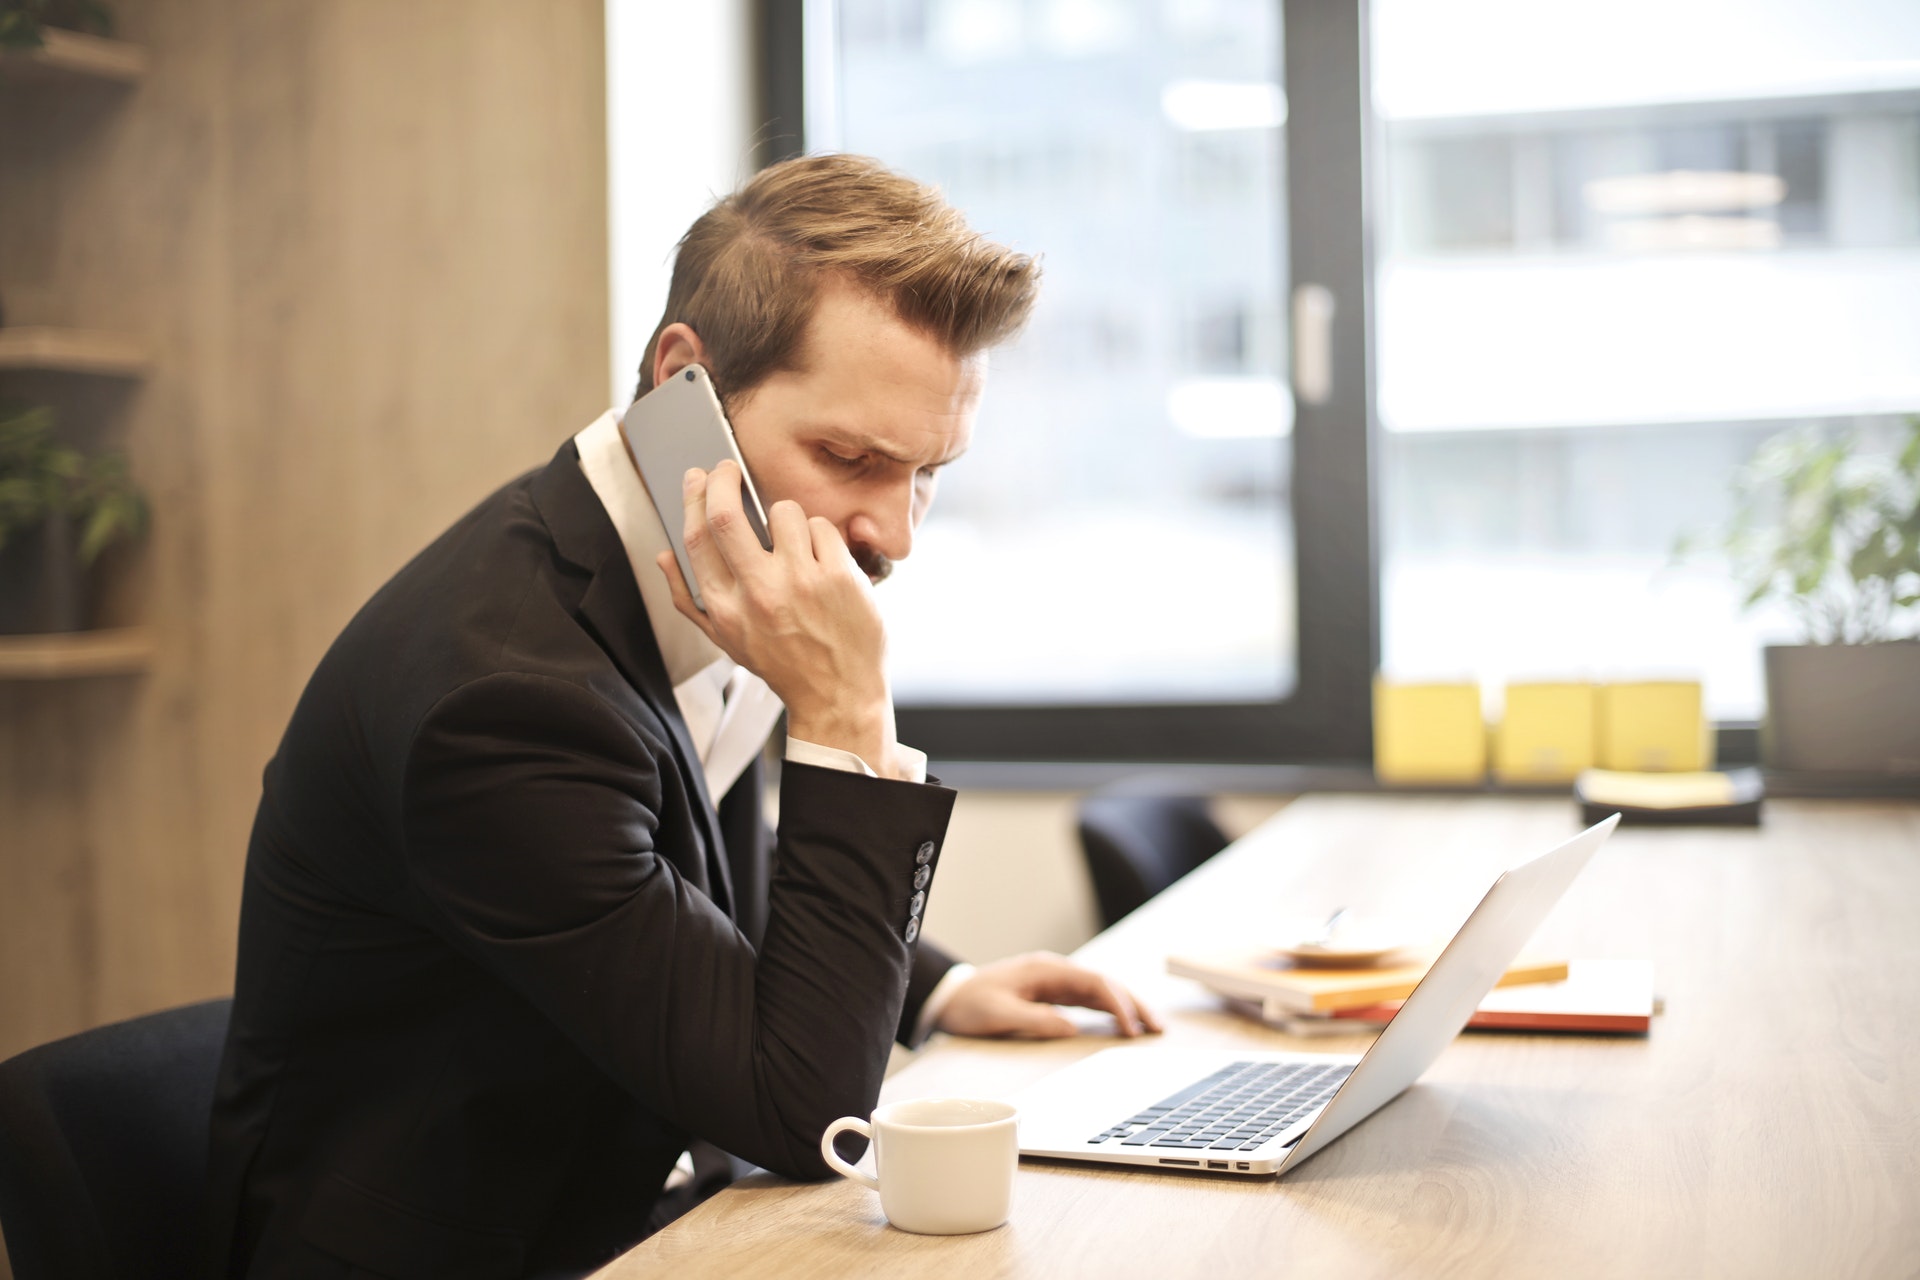 11 Tips to Help You Get New Clients Through Cold Calling